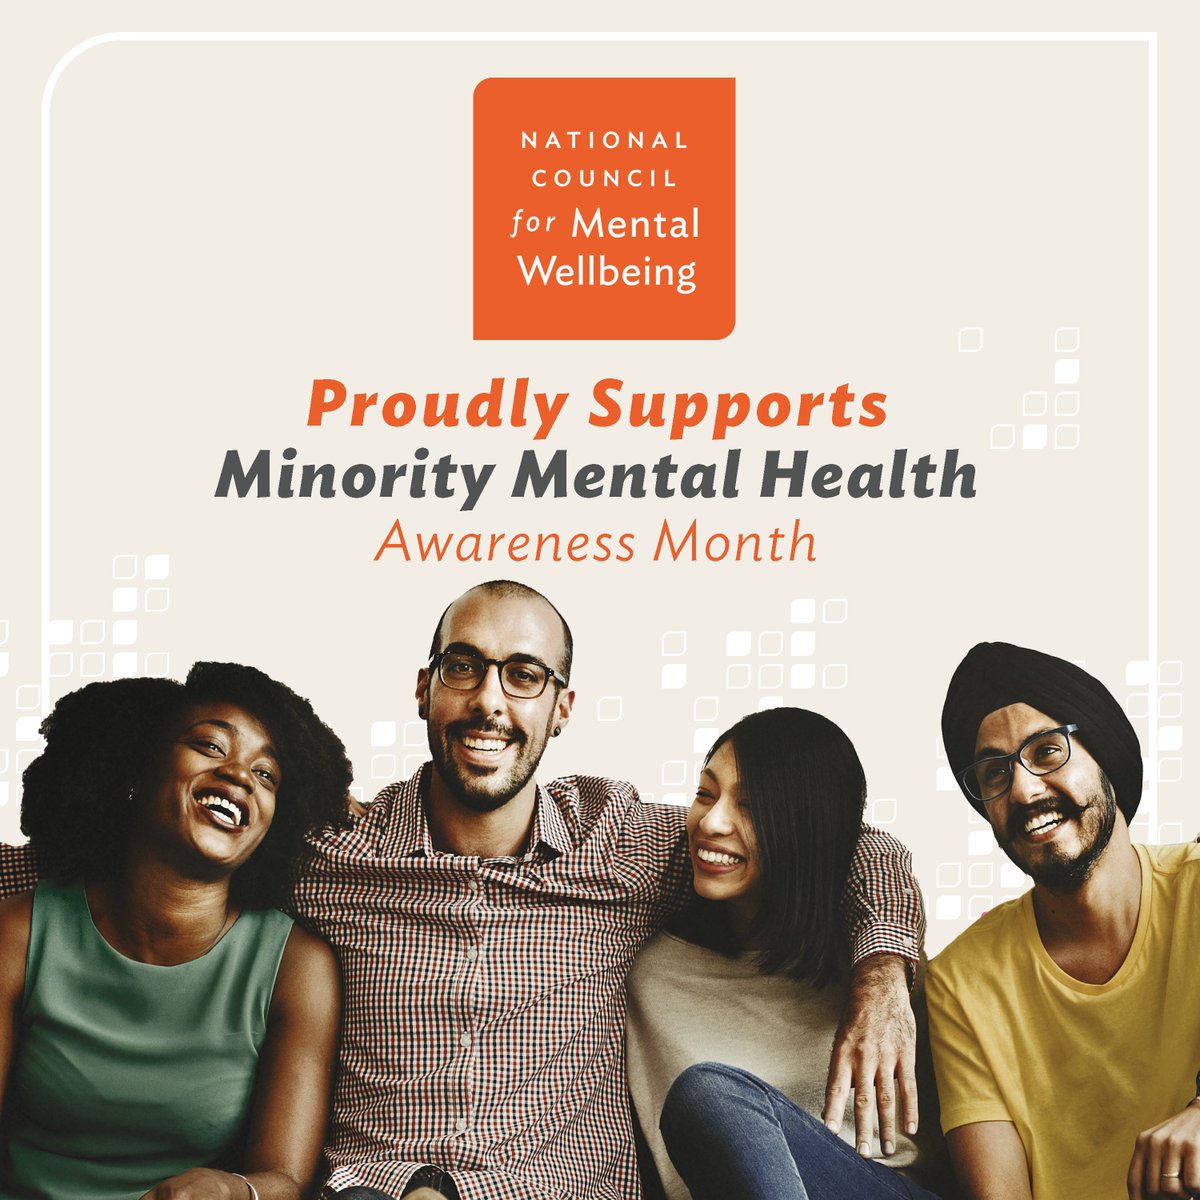 Marginalized communities continue to face disproportionate challenges around access to care. This #MinorityMentalHealthMonth–and all year long–let's commit to addressing the vast health care disparities that exist among racial, ethnic, and cultural groups. #BIPOCMentalHealthMonth